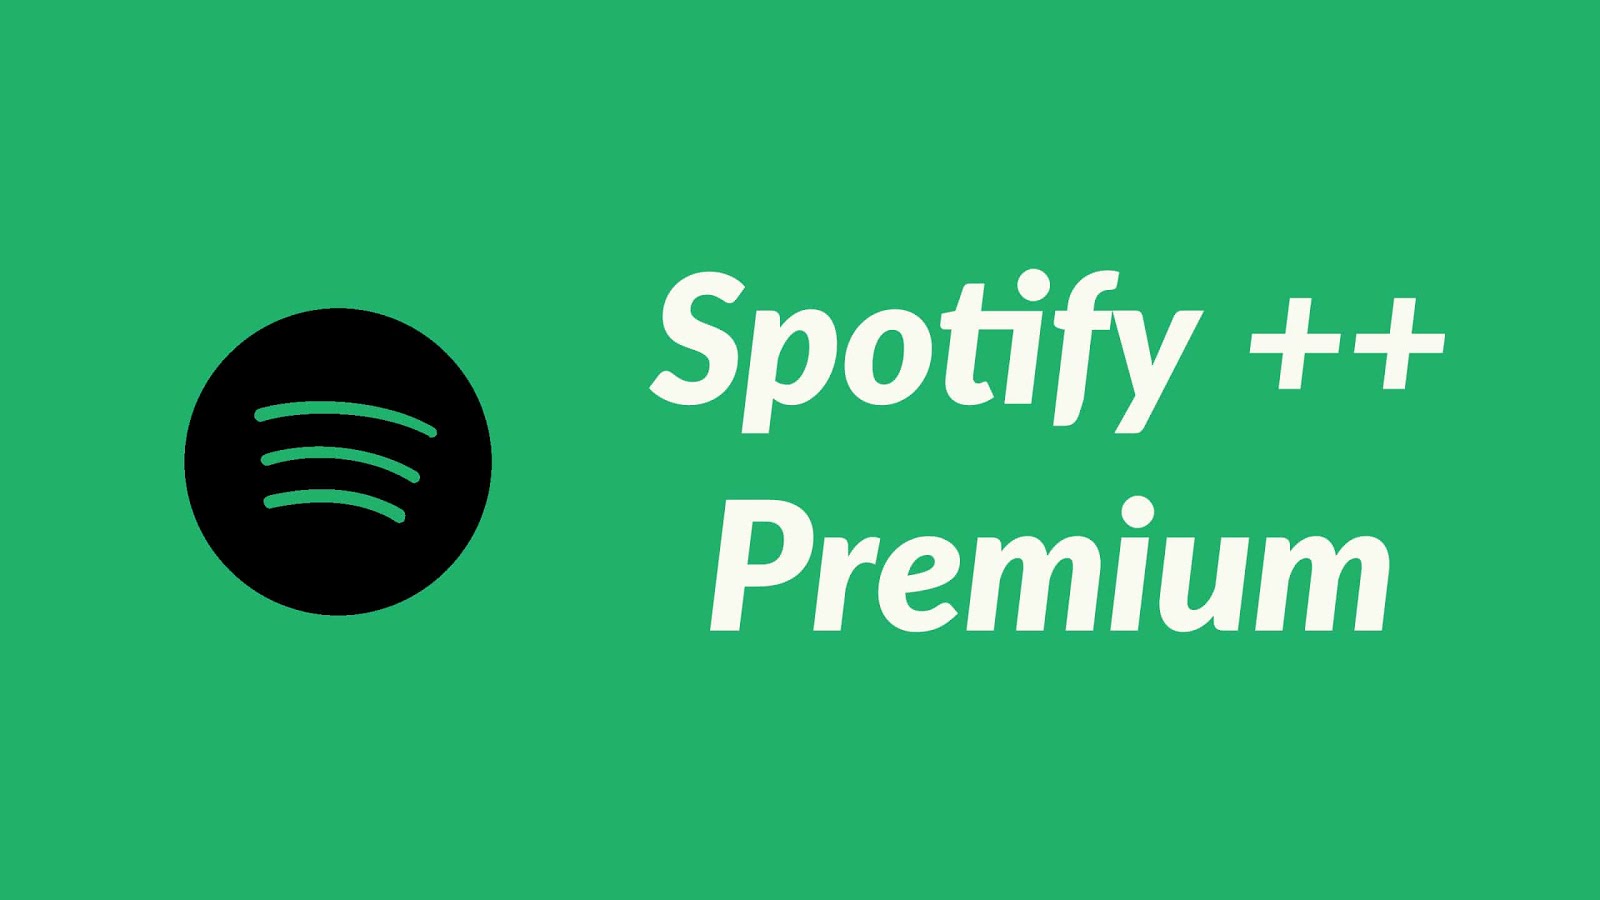 Spotify++ ipa download no ad 2018 release